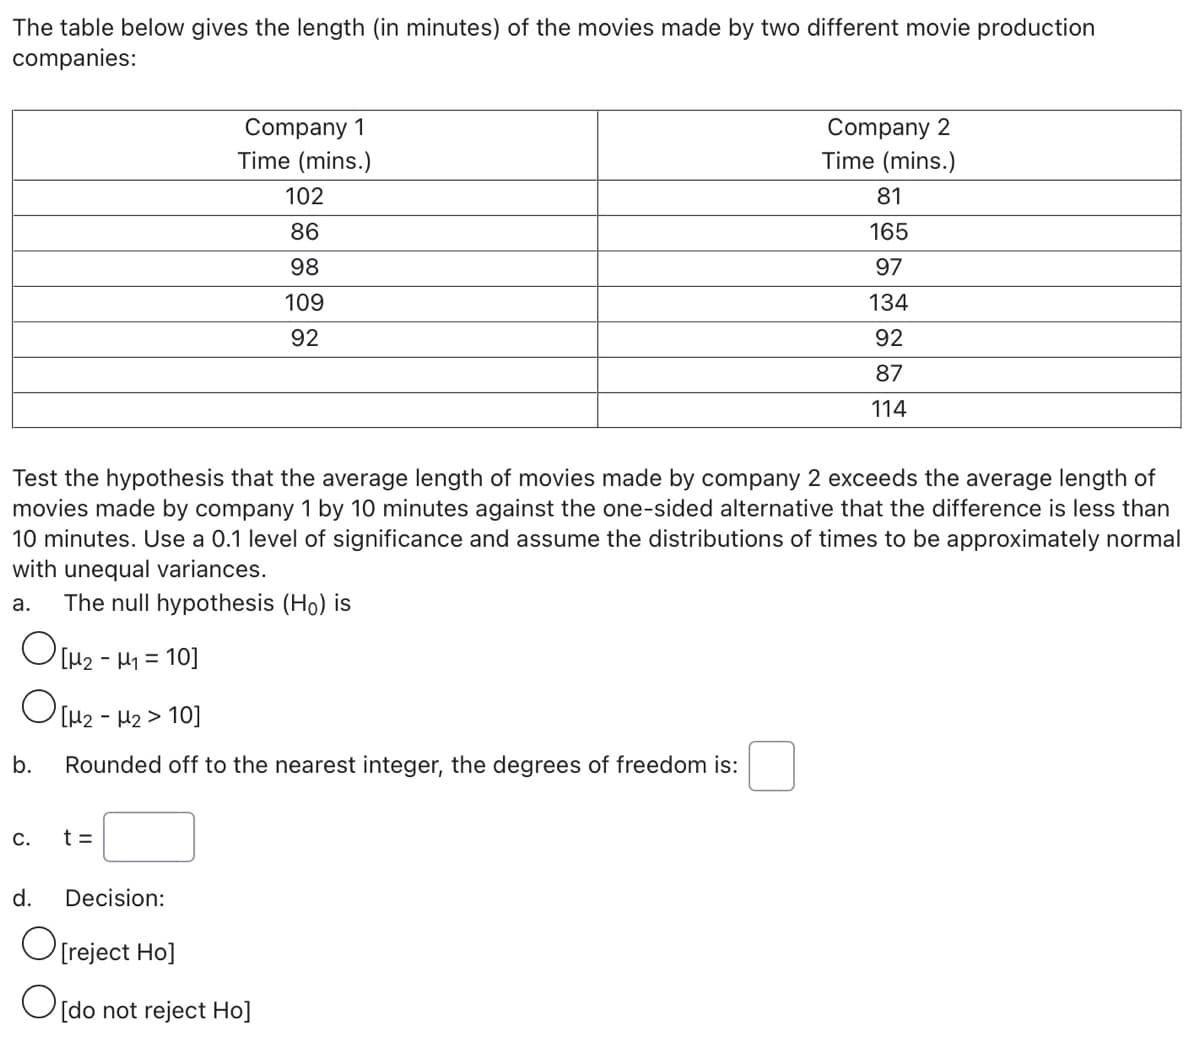 The table below gives the length (in minutes) of the movies made by two different movie production
companies:
Company 1
Time (mins.)
Company 2
Time (mins.)
102
81
86
165
98
97
109
134
92
92
87
114
Test the hypothesis that the average length of movies made by company 2 exceeds the average length of
movies made by company 1 by 10 minutes against the one-sided alternative that the difference is less than
10 minutes. Use a 0.1 level of significance and assume the distributions of times to be approximately normal
with unequal variances.
The null hypothesis (Ho) is
а.
O[H2 - H1 = 10]
2 - H2 > 10]
b.
Rounded off to the nearest integer, the degrees of freedom is:
С.
t =
d.
Decision:
O[reject Ho]
O[do not reject Ho]
